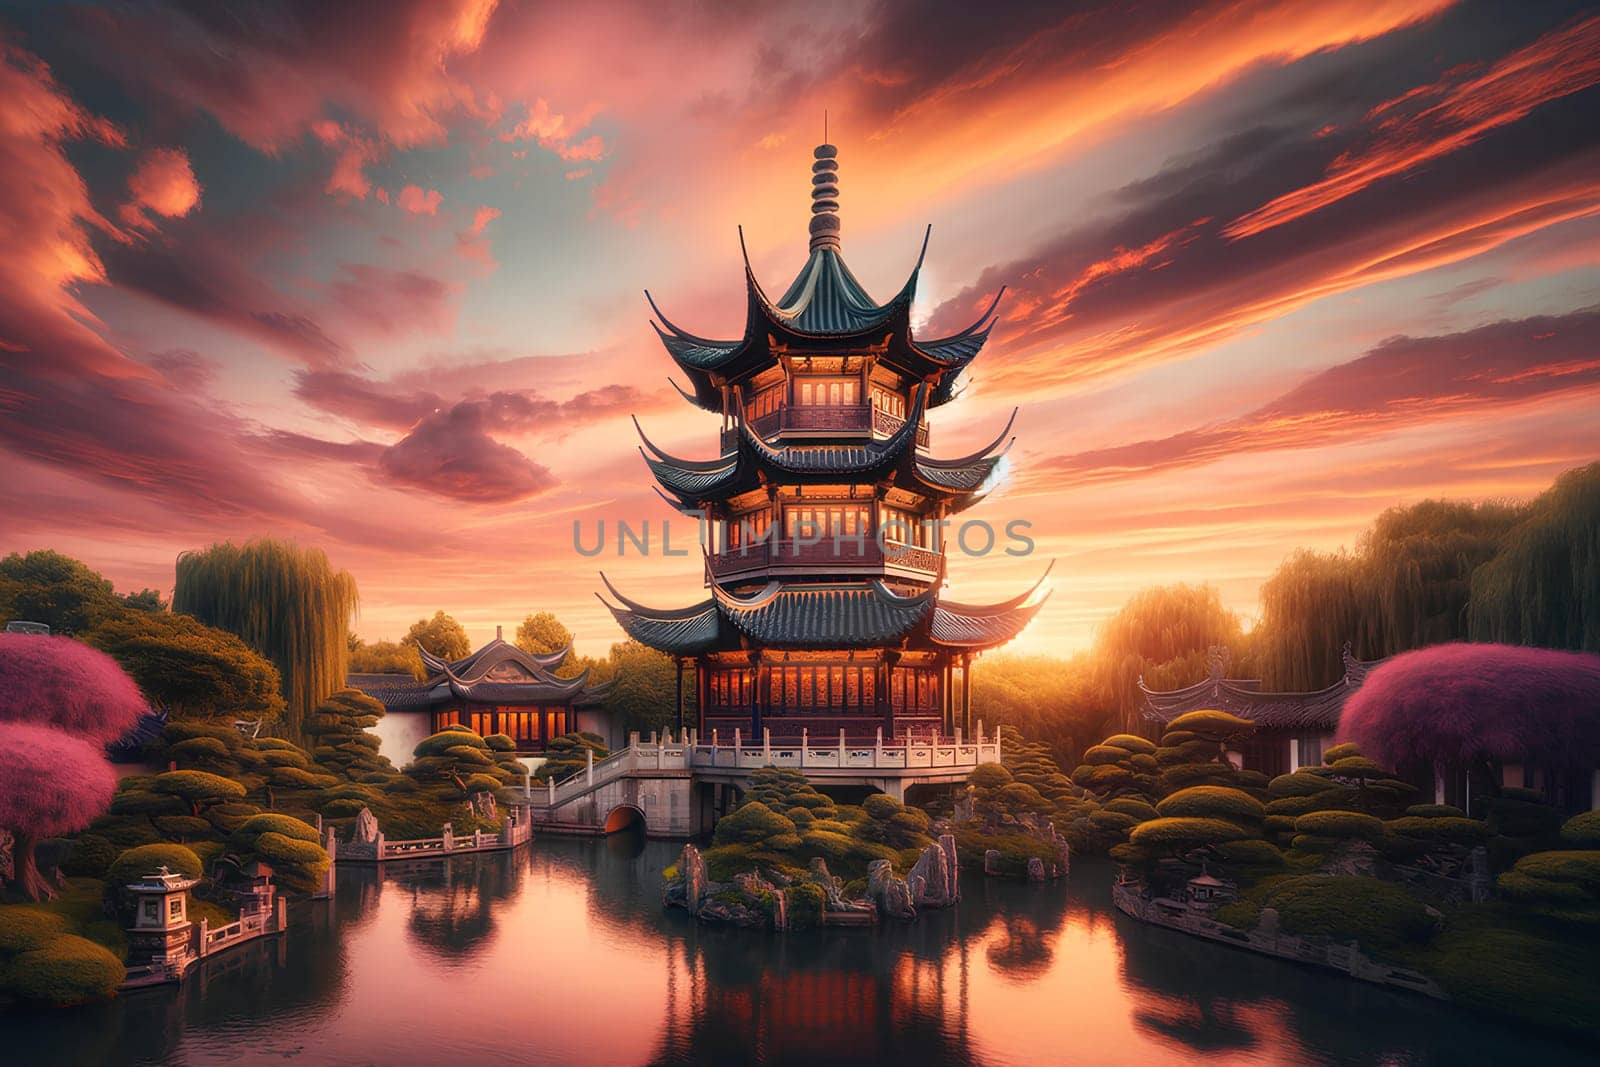 Chinese pagoda in a picturesque garden with a lake by Annado